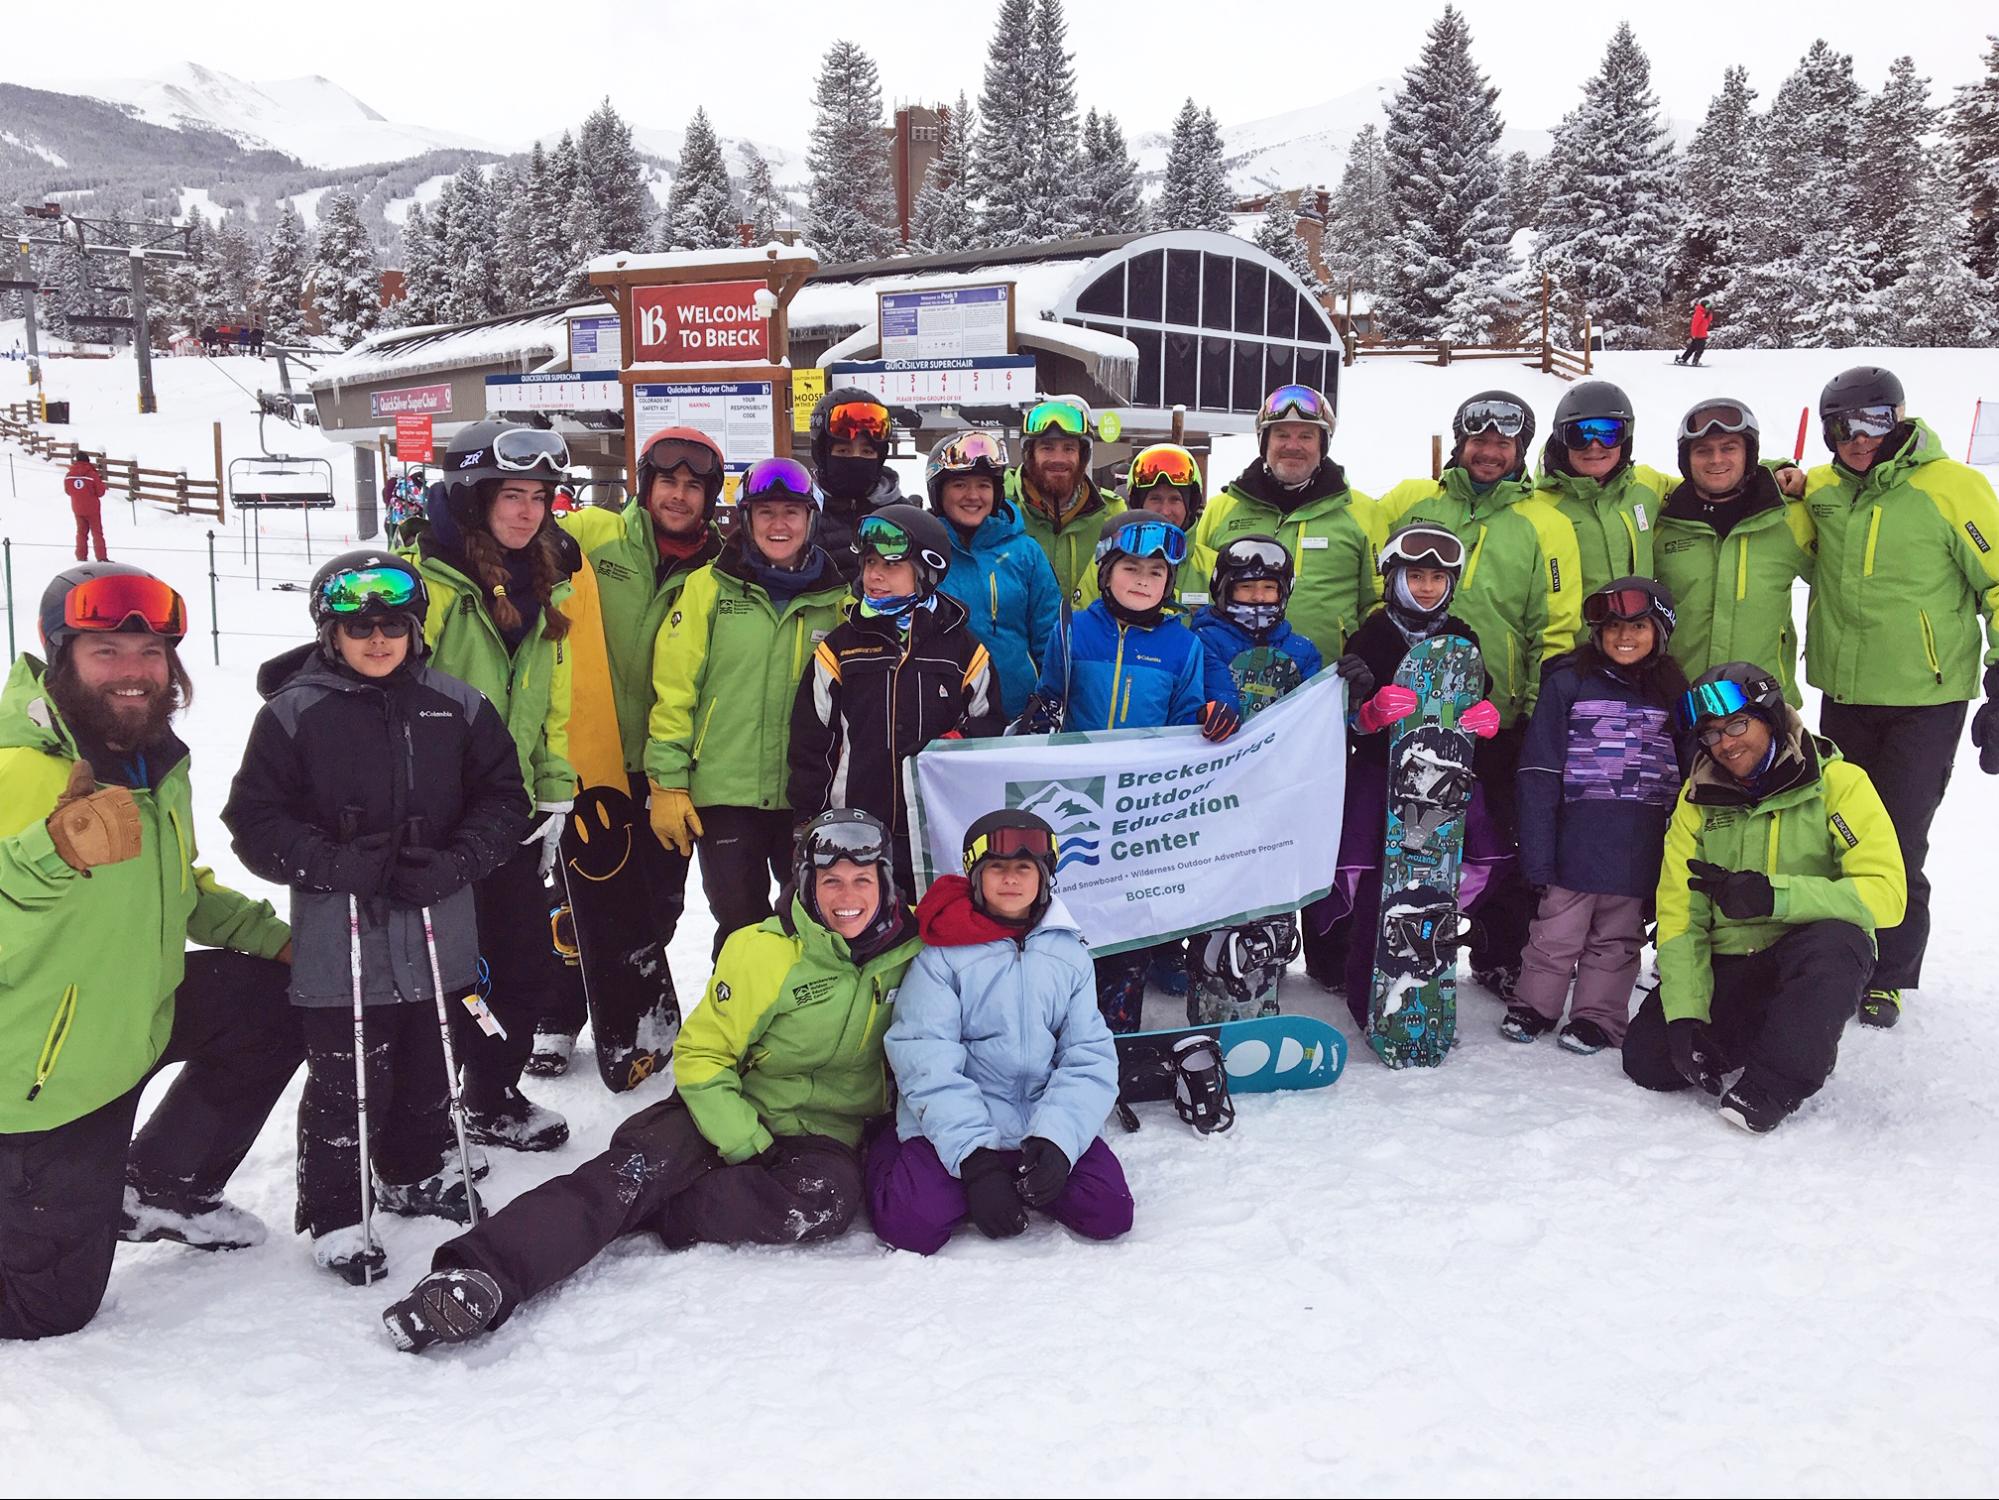 Skiing and snowboarding in Breckenridge with the SSA program.